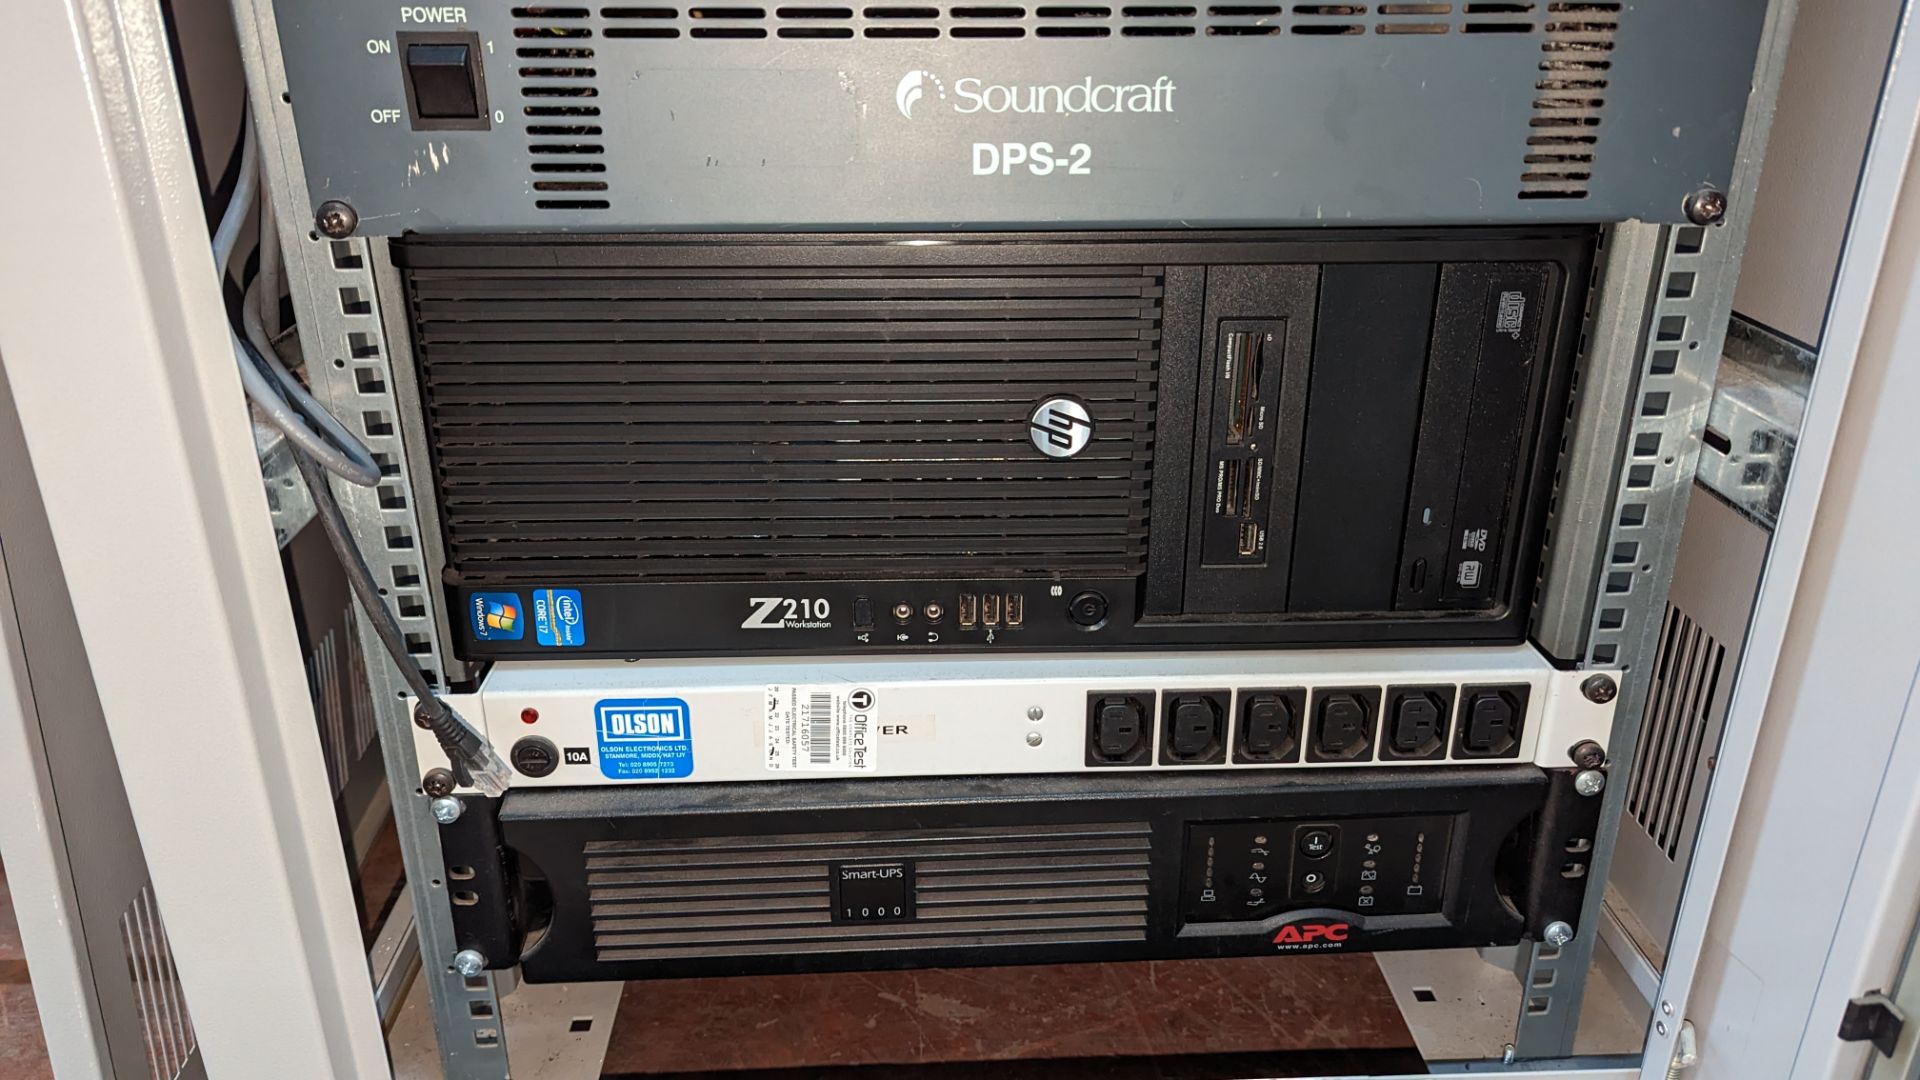 Rack mounted system and contents including Draytek modem, Vipronet wireless LAN, patch panel, Bridg- - Image 16 of 26